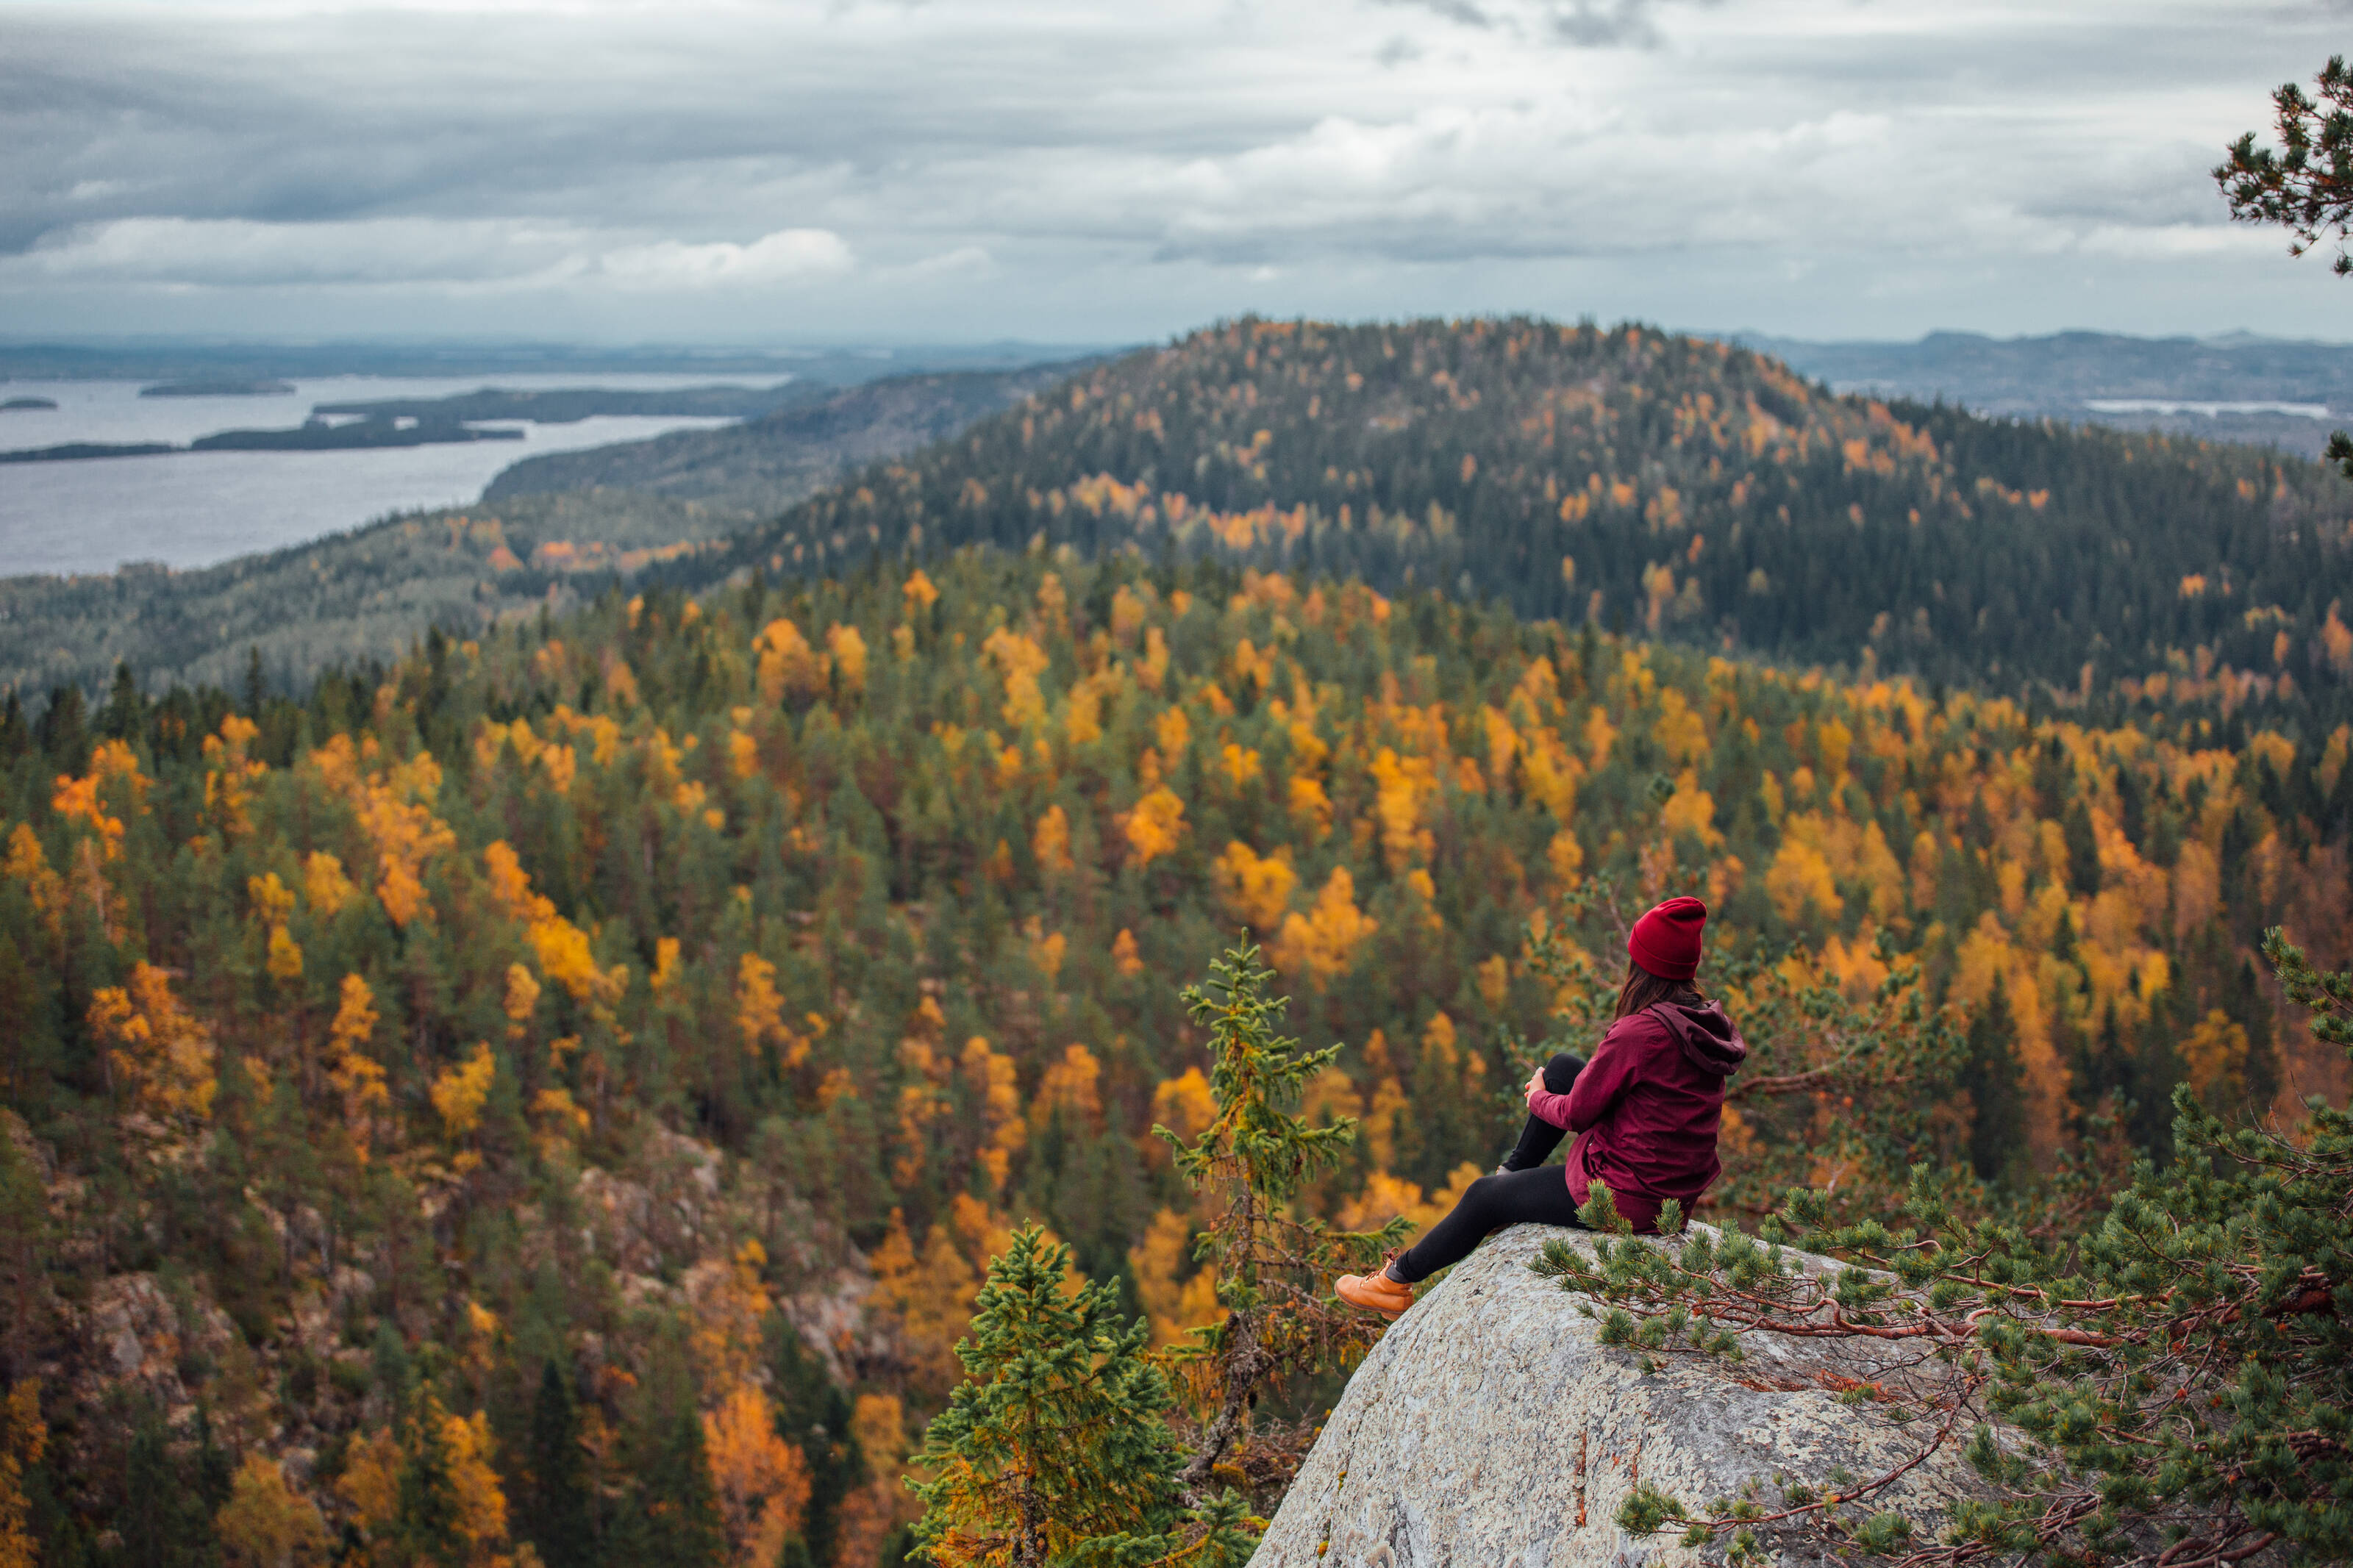 A hiker admiring the autumn foliage over forests in a Finnish national landscape in Koli.